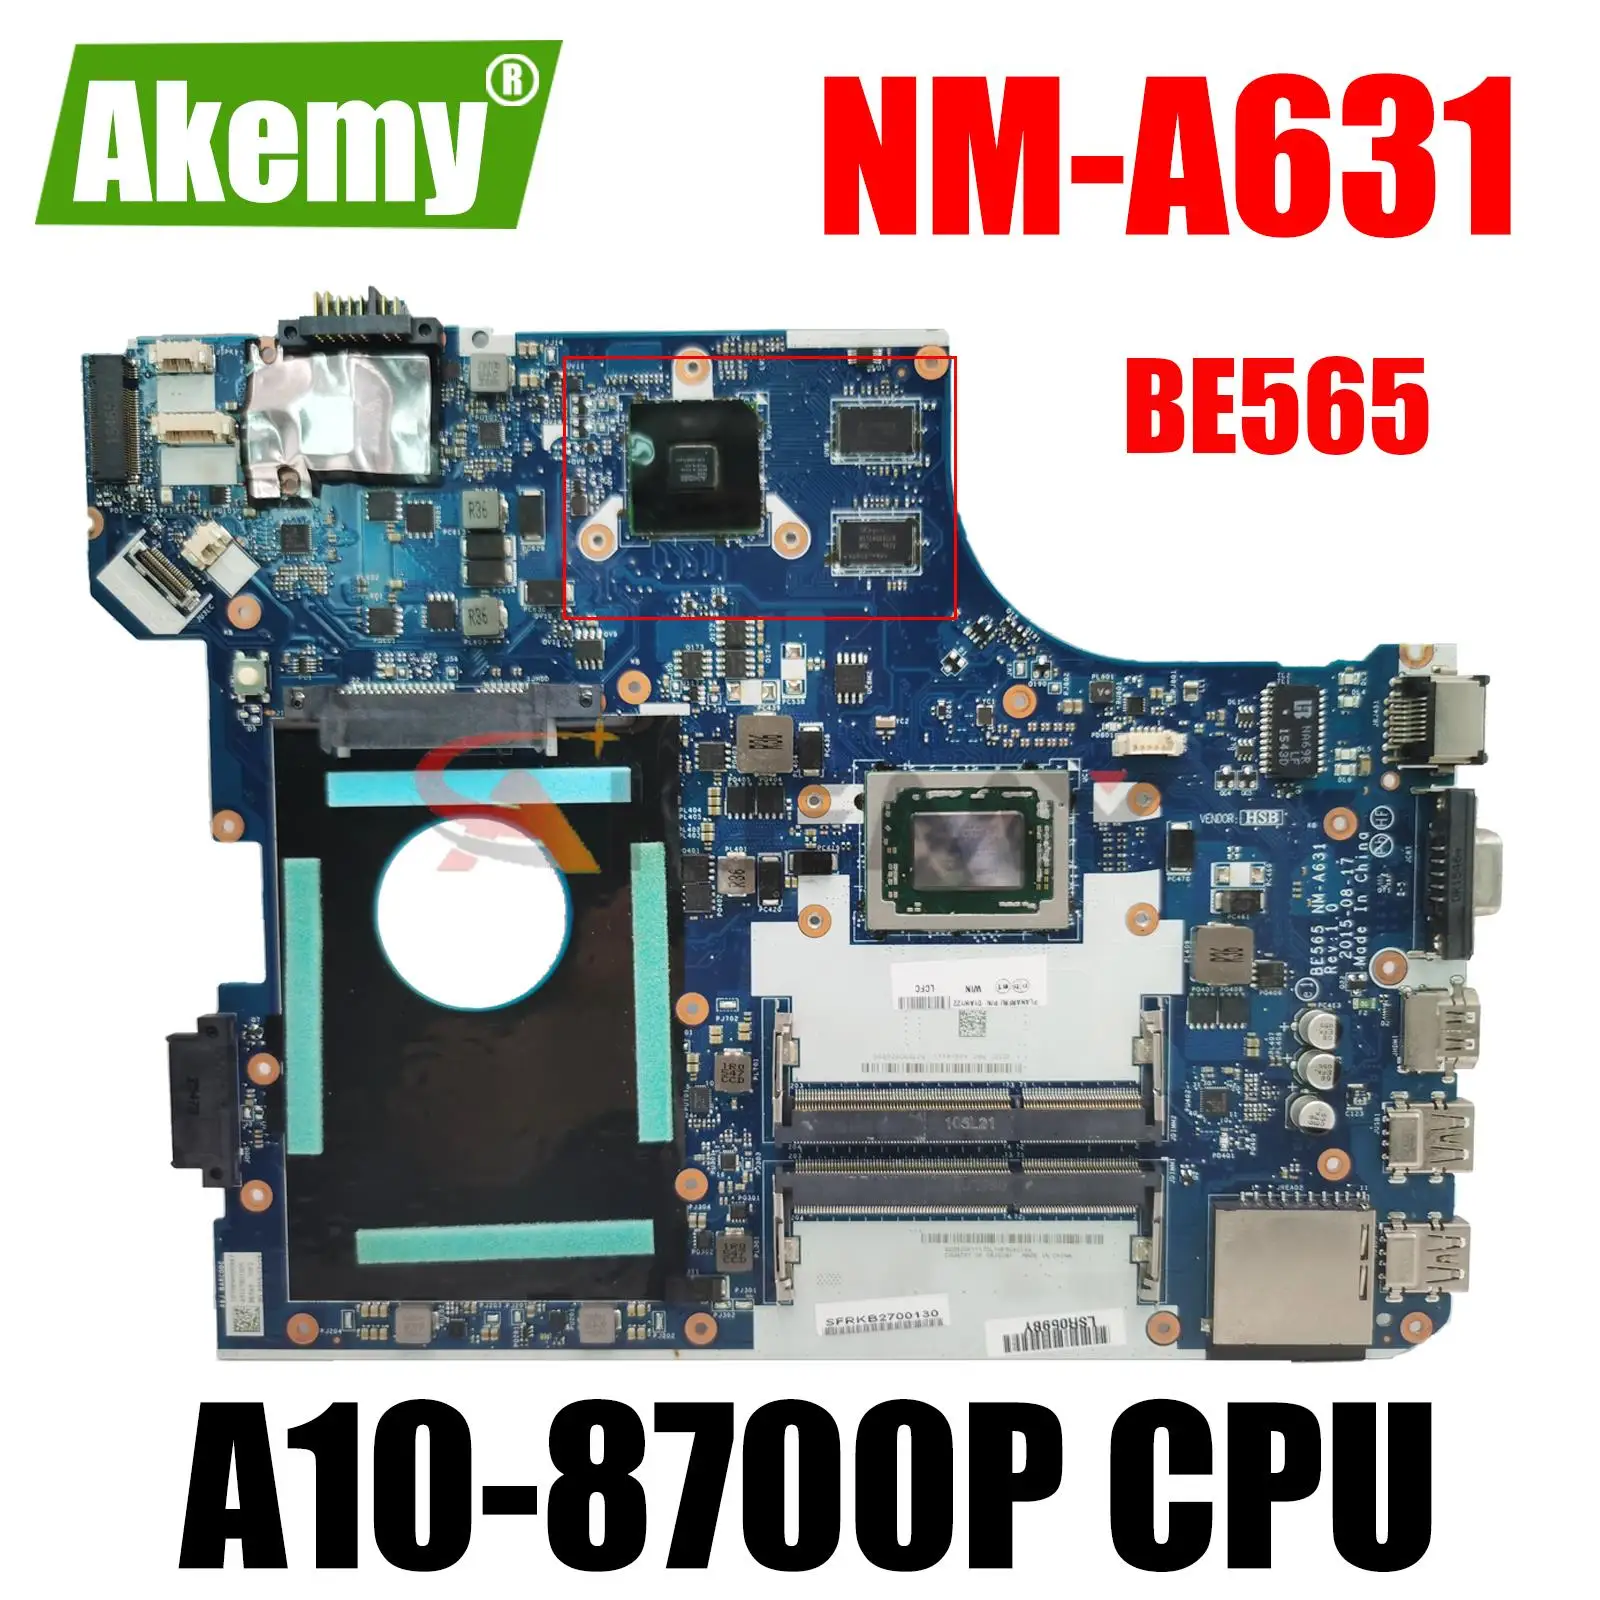 

For ThinkPad E565 Laptop Motherboard With A10-8700P CPU R6 M340DX 2GB GPU BE565 NM-A631 MB 100% fully Tested